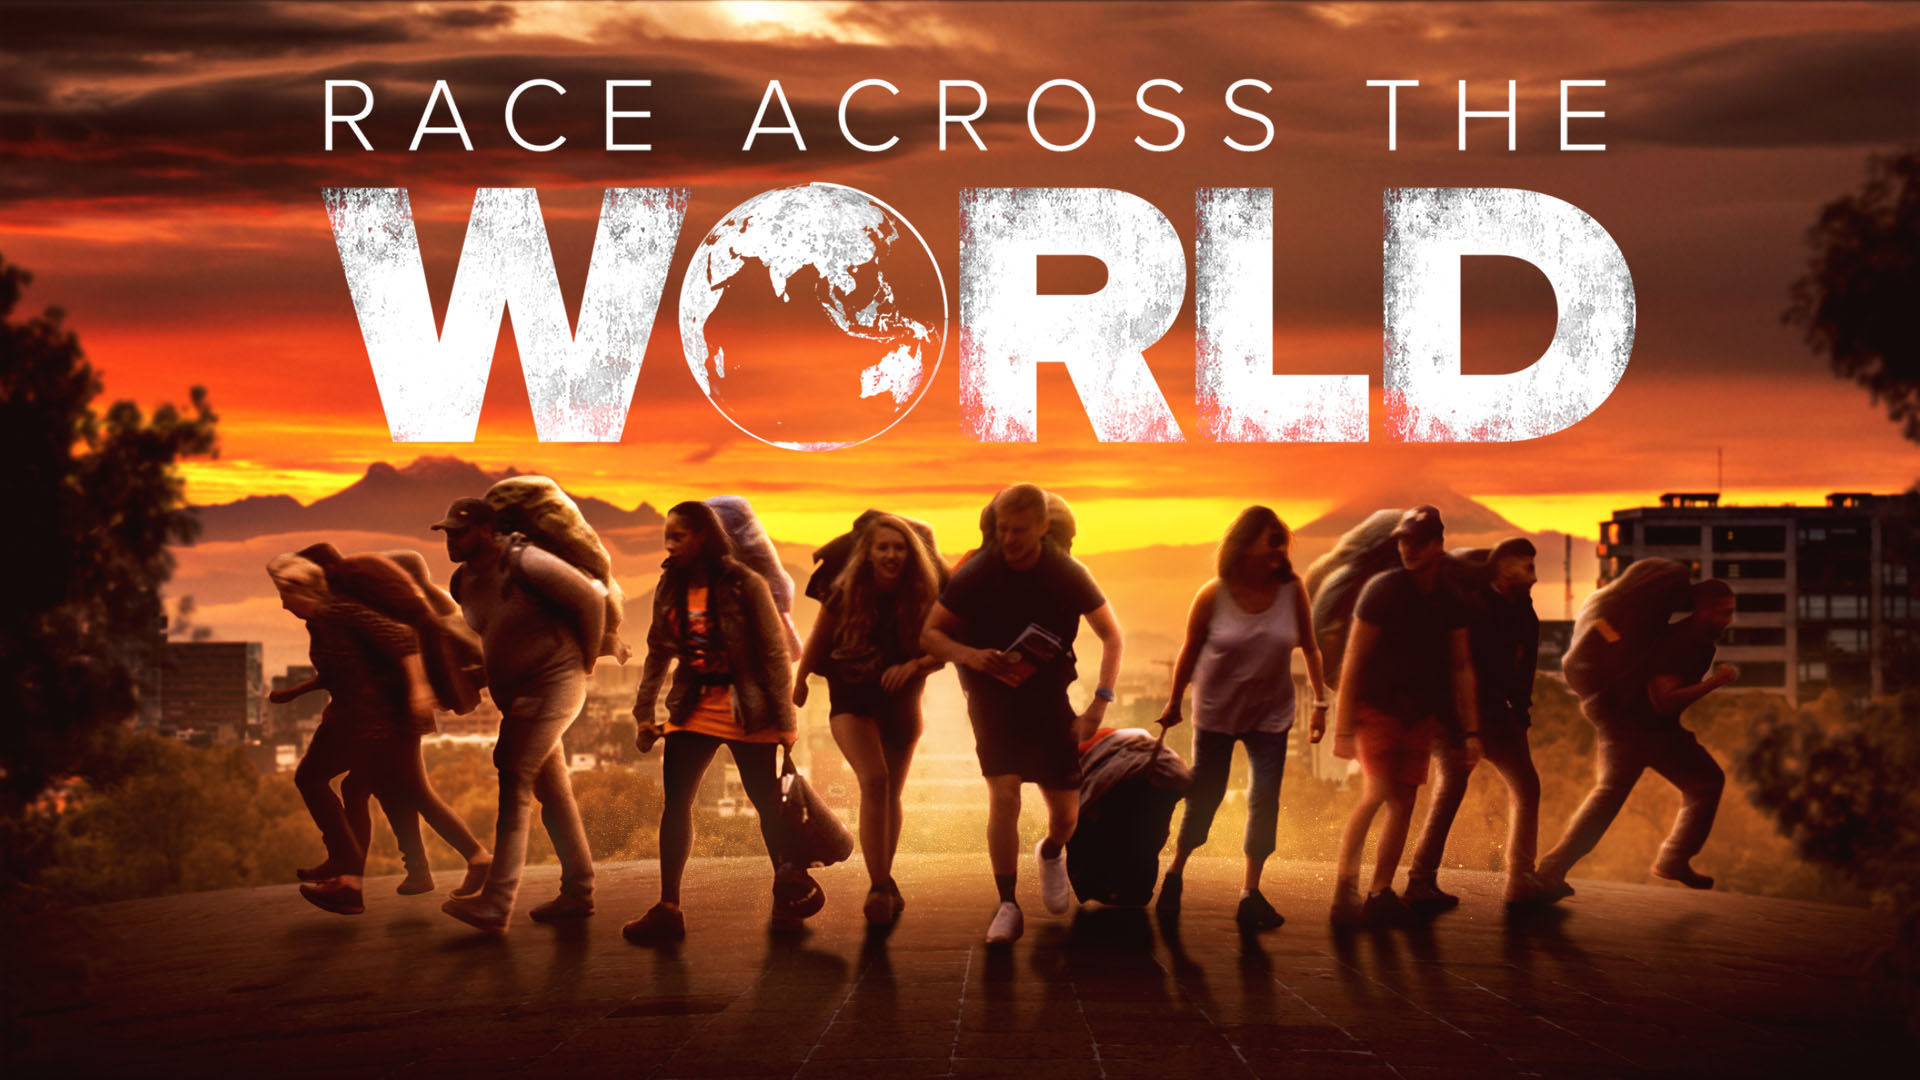 Watch Race Across the World live or ondemand Freeview Australia